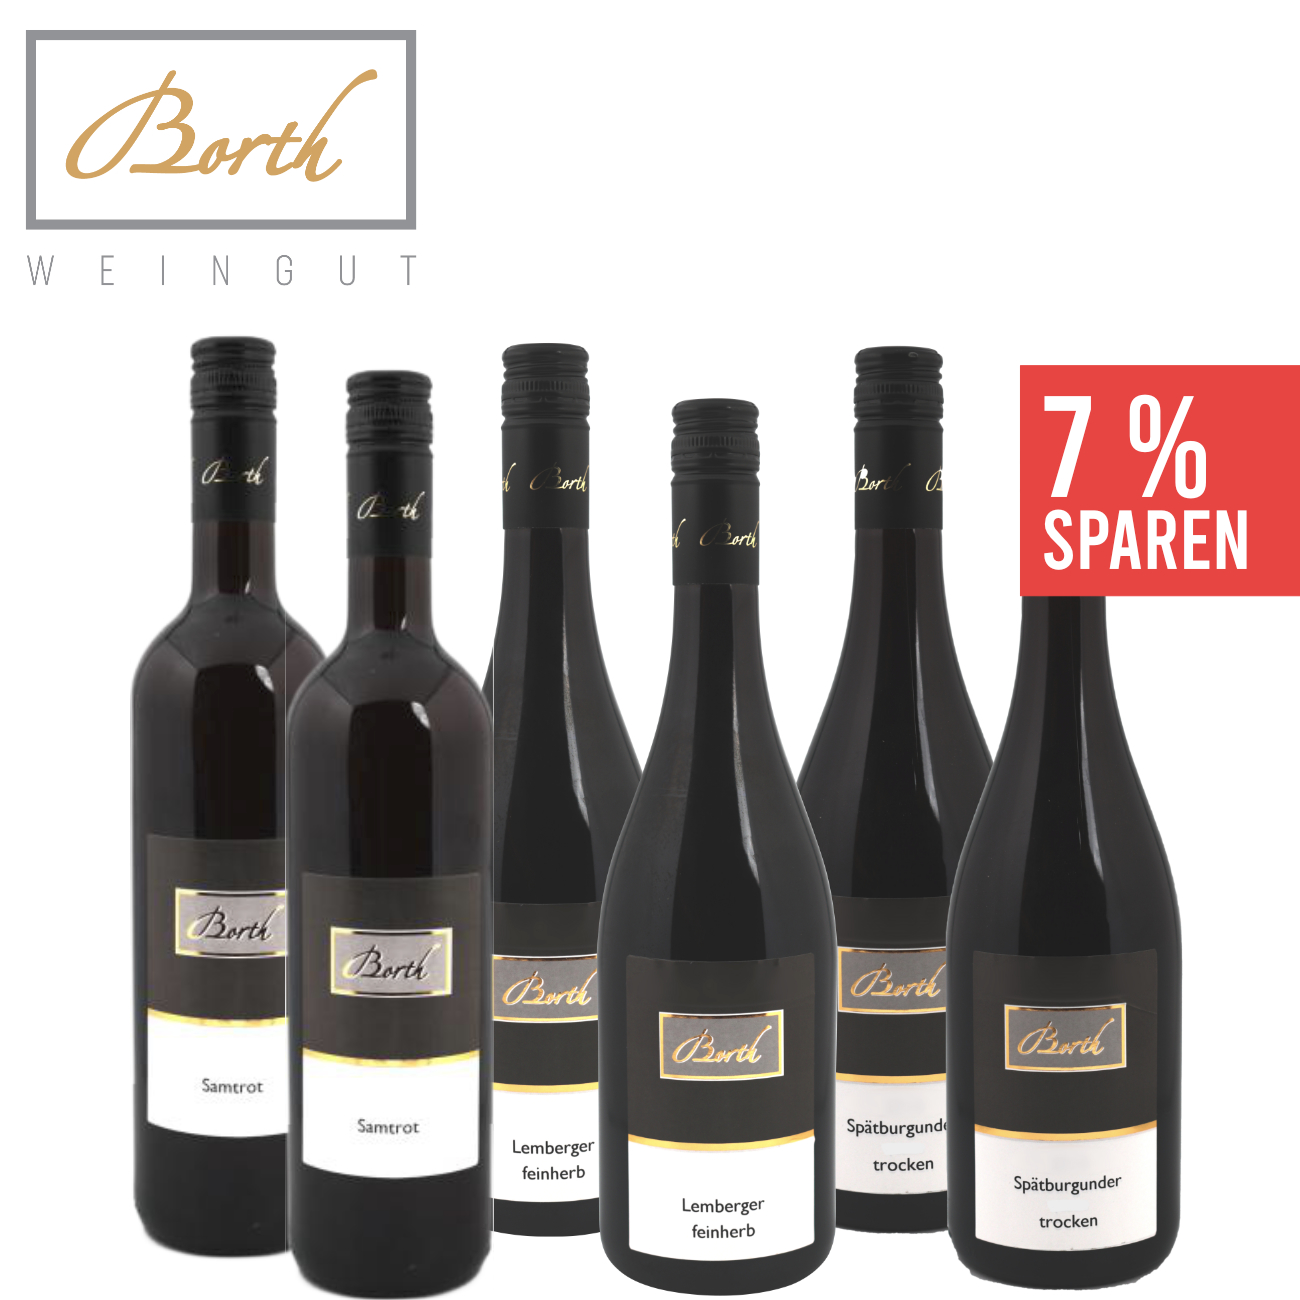 The wein.plus our of Find+Buy: members wein.plus wines Find+Buy |